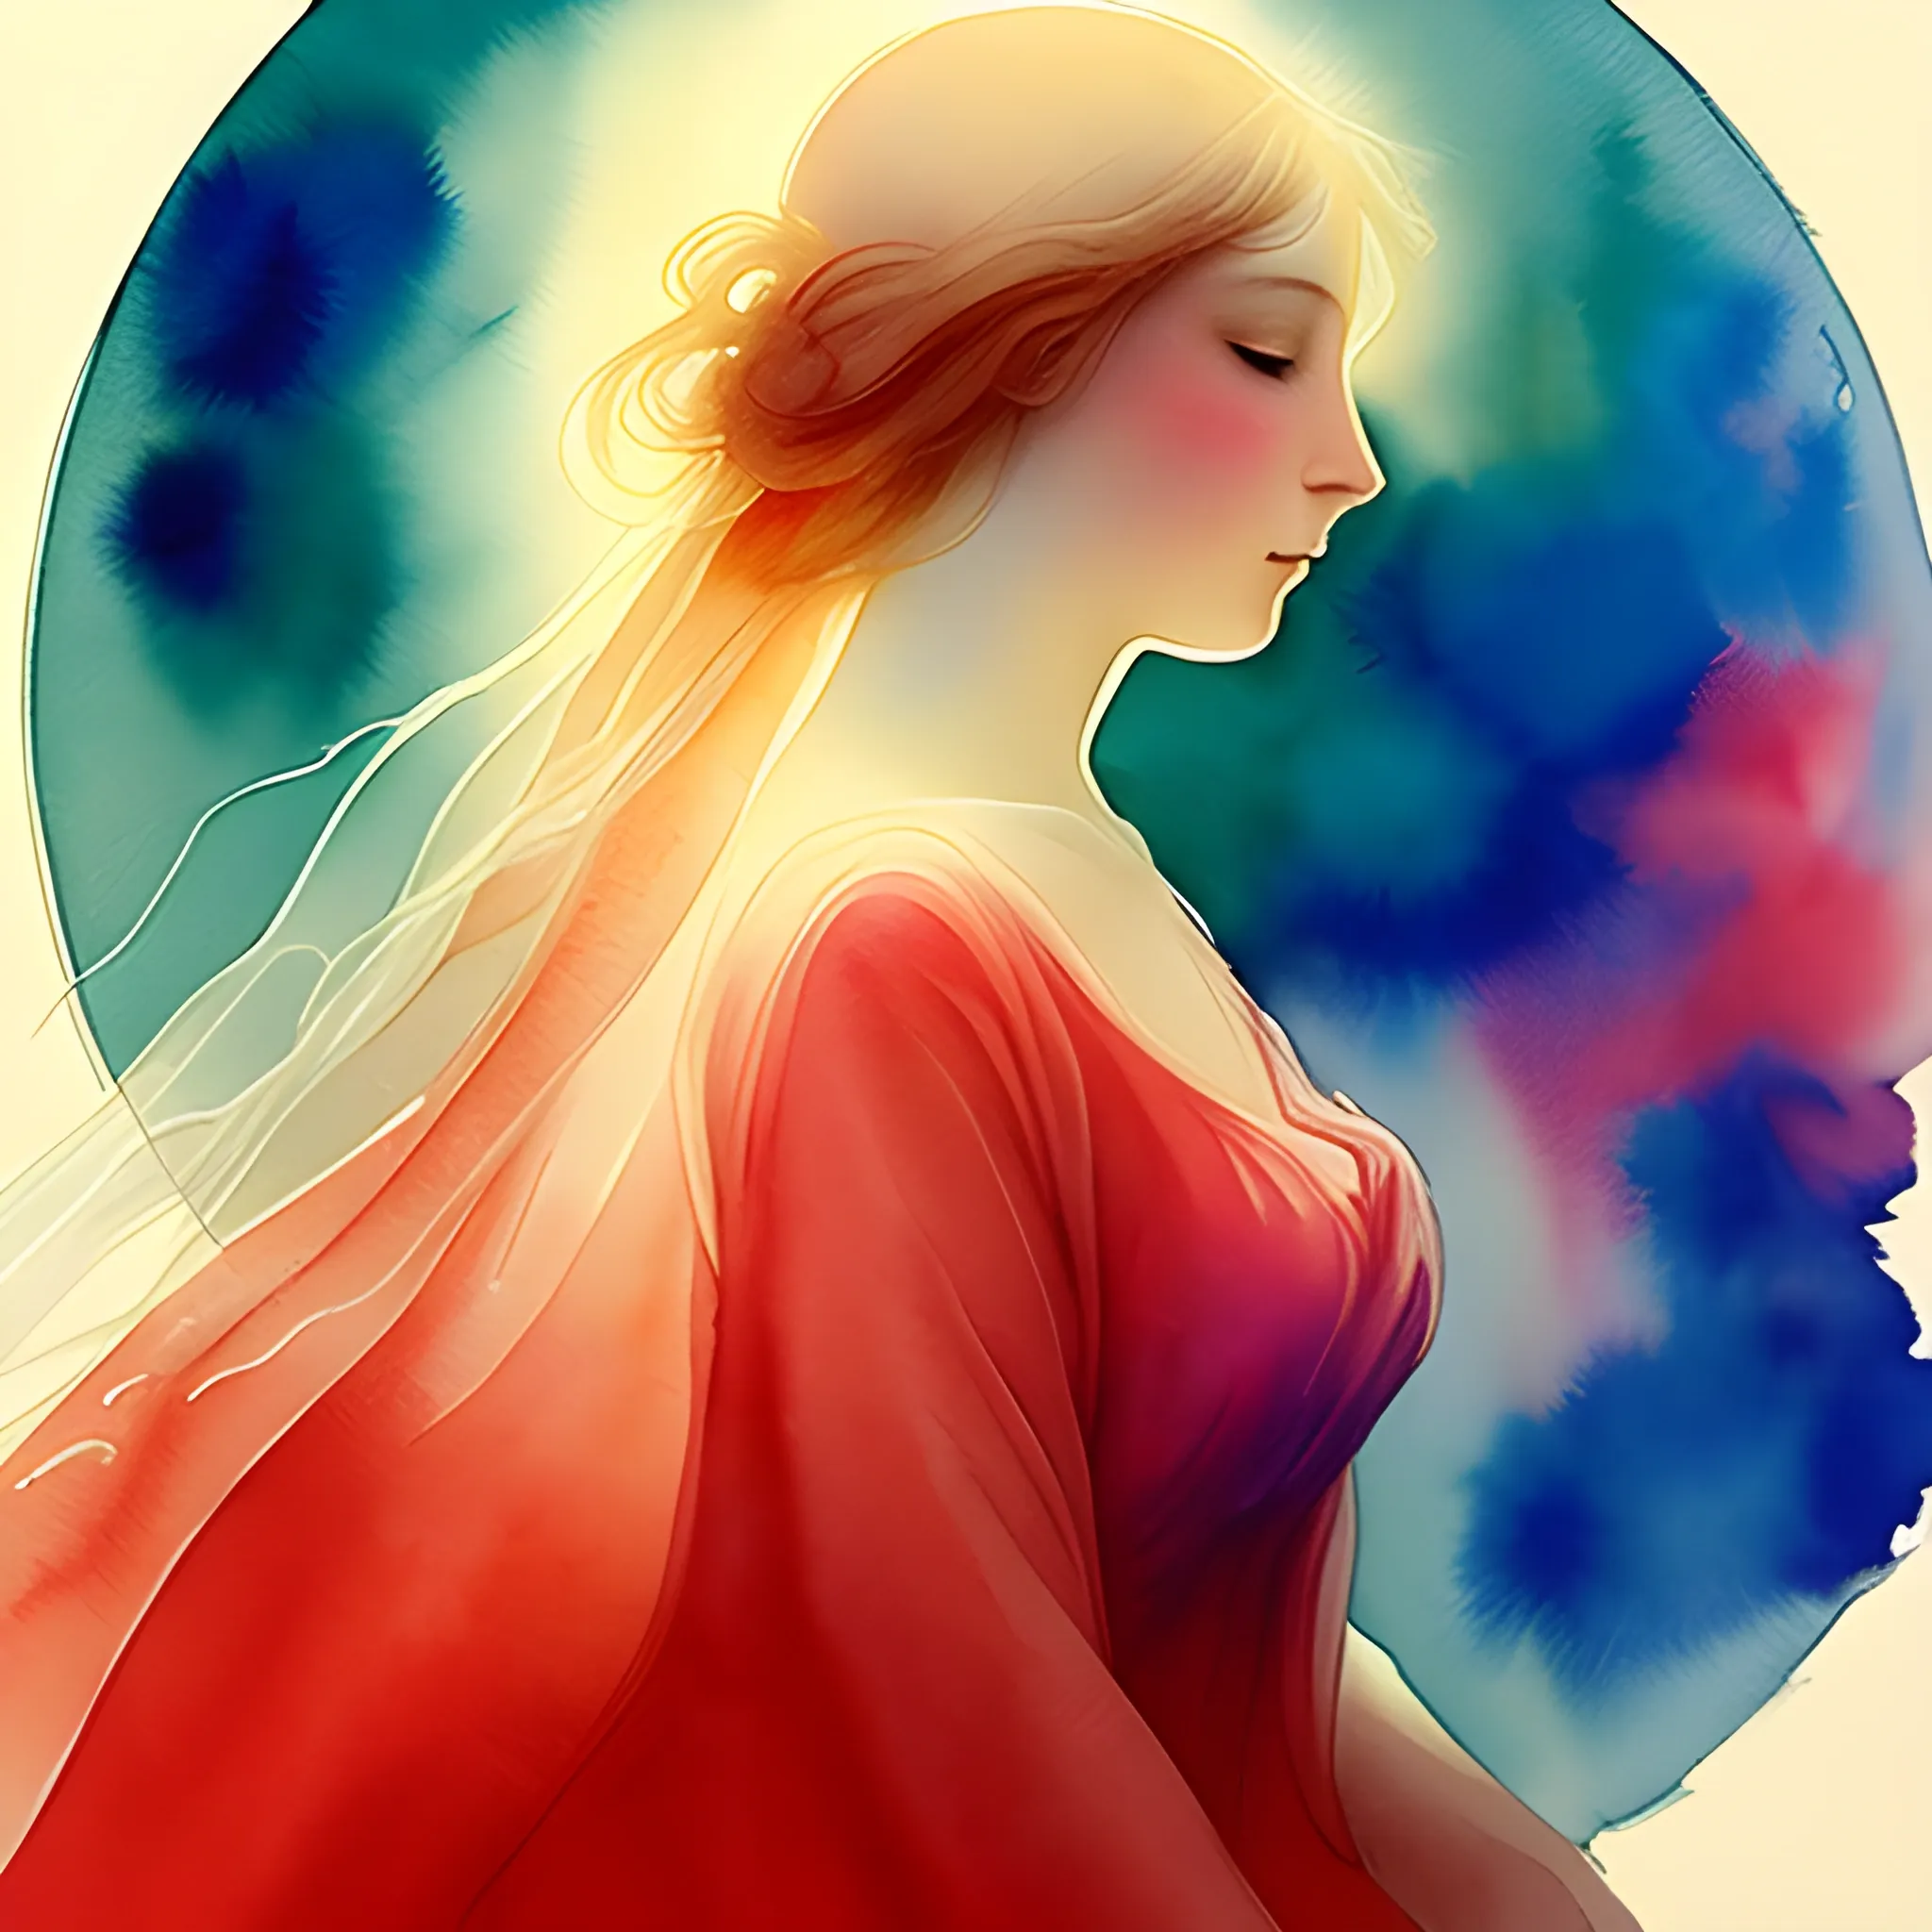 Illustrate a celestial scene with a woman embodying an angelic presence, bathed in the gentle radiance of divine light. Utilize watercolor techniques reminiscent of the renowned painter J.M.W. Turner, with the predominant use of the color red to emphasize the ethereal beauty